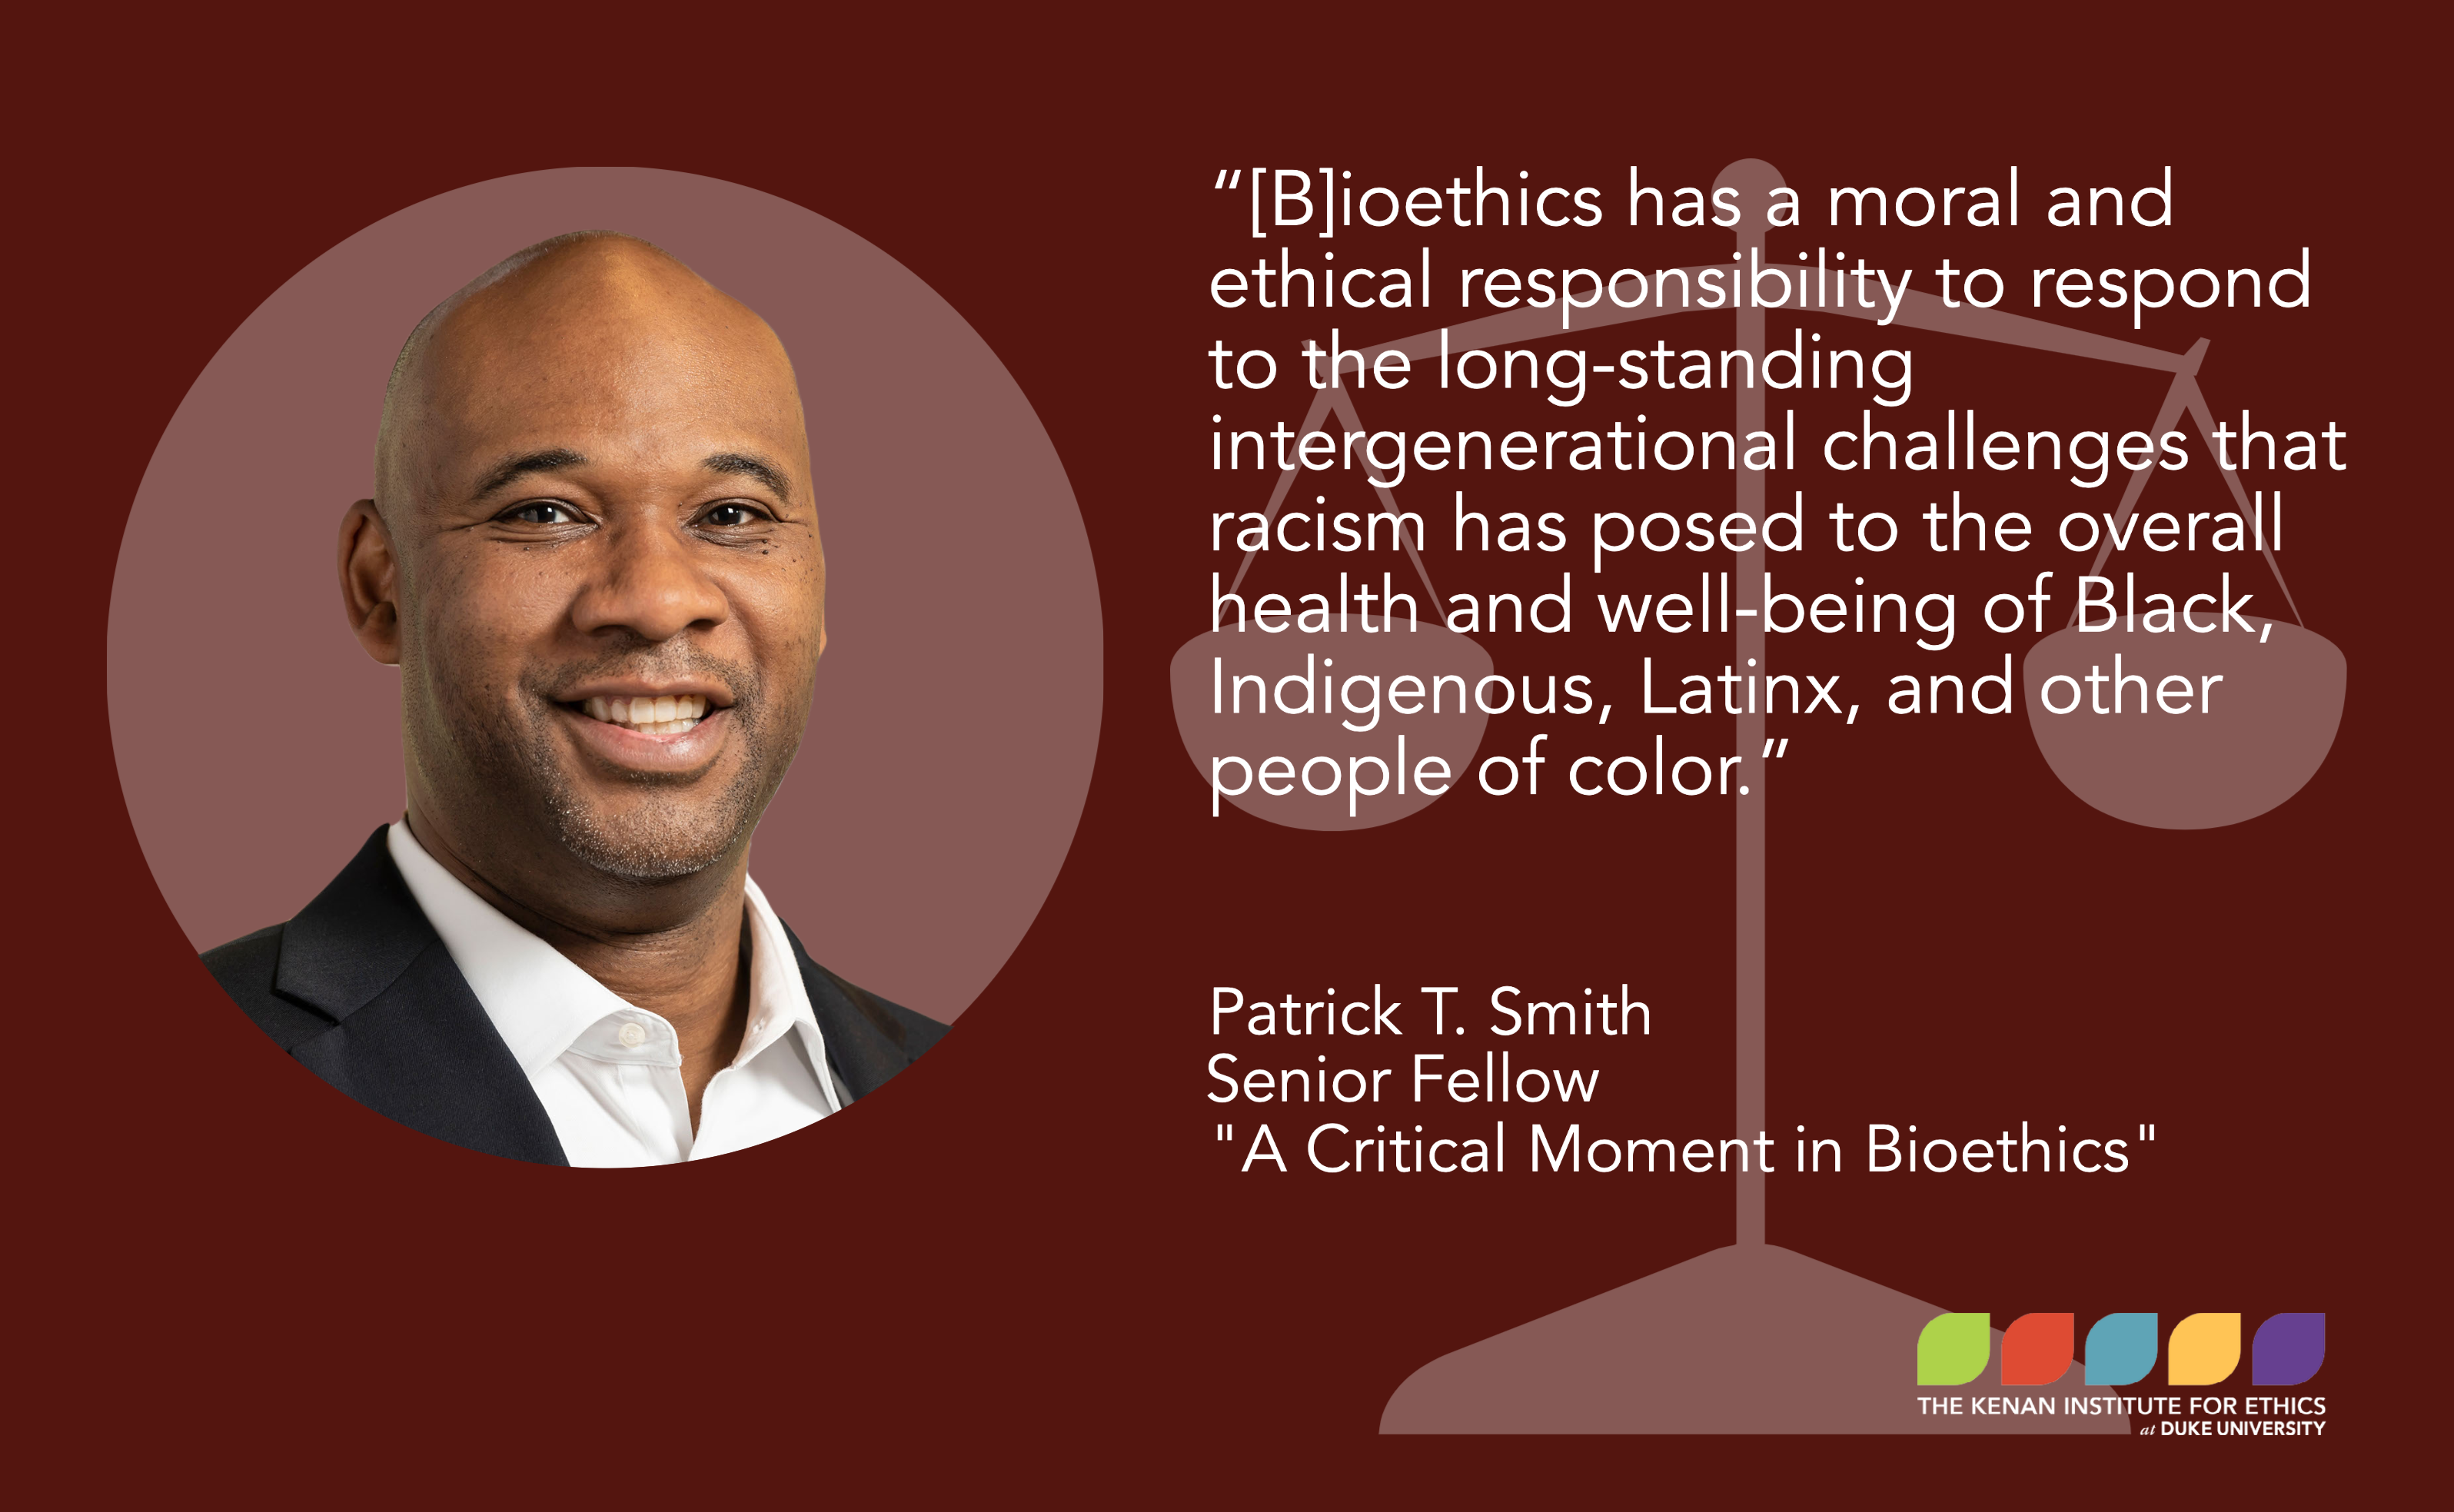 “[B]ioethics has a moral and ethical responsibility to respond to the long-standing intergenerational challenges that racism has posed to the overall health and well-being of Black, Indigenous, Latinx, and other people of color.” Patrick Smith, Senior Fellow